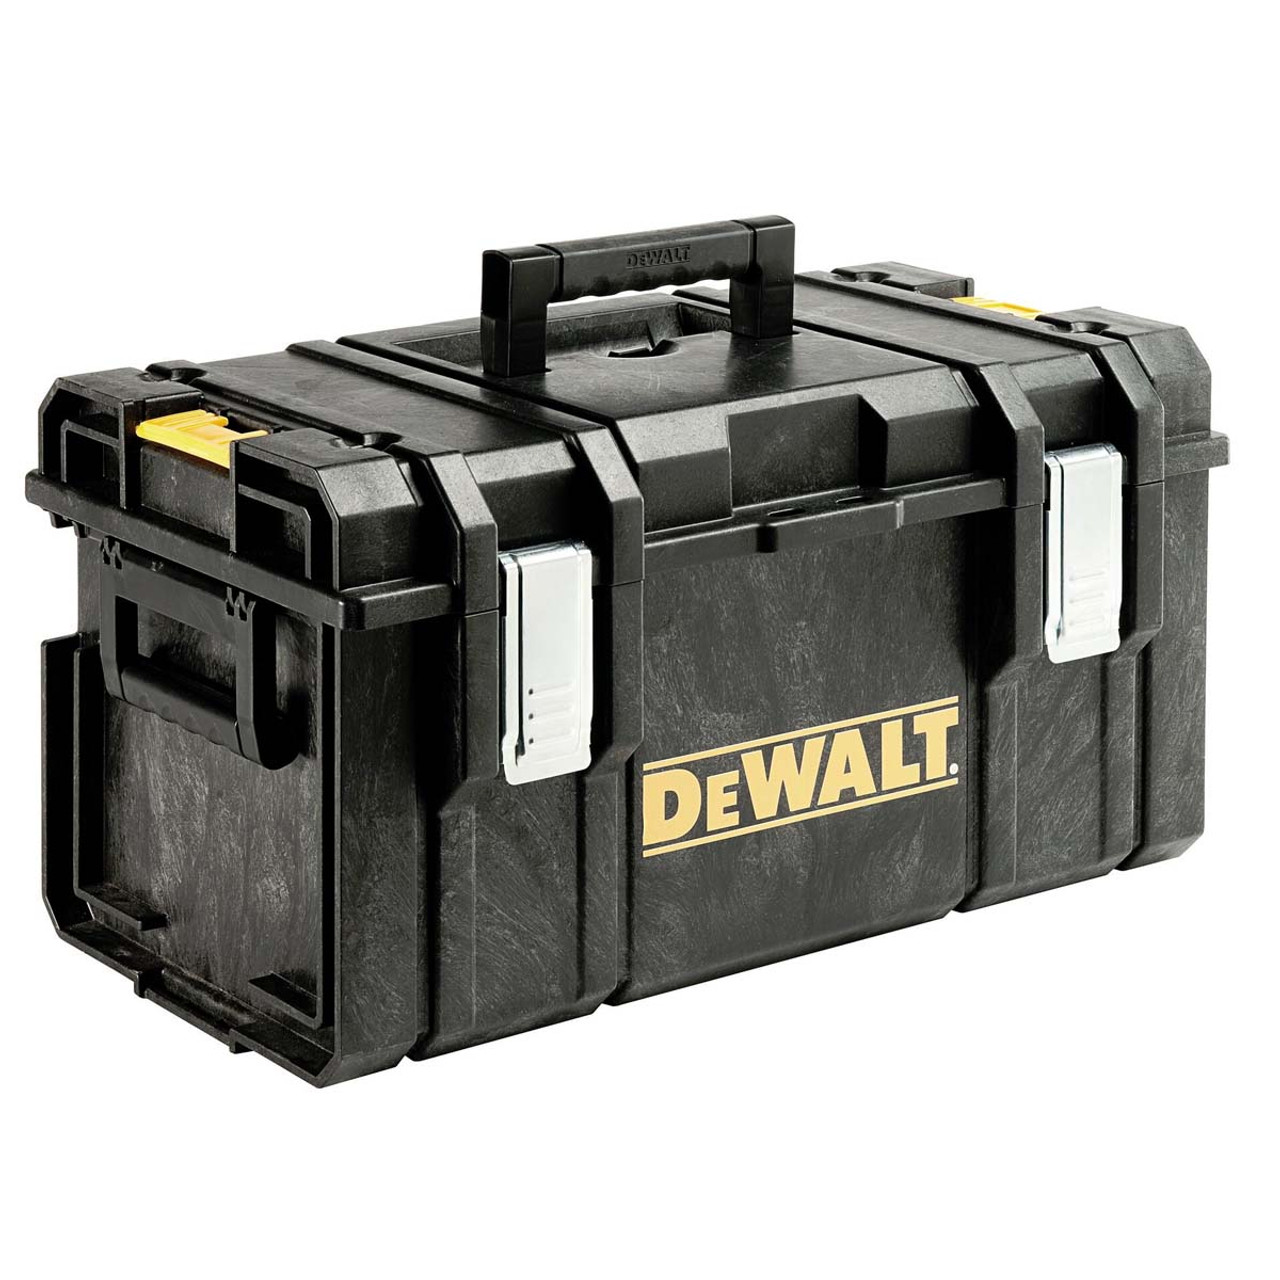 DS300 1-70-322 Toughsystem Tool box